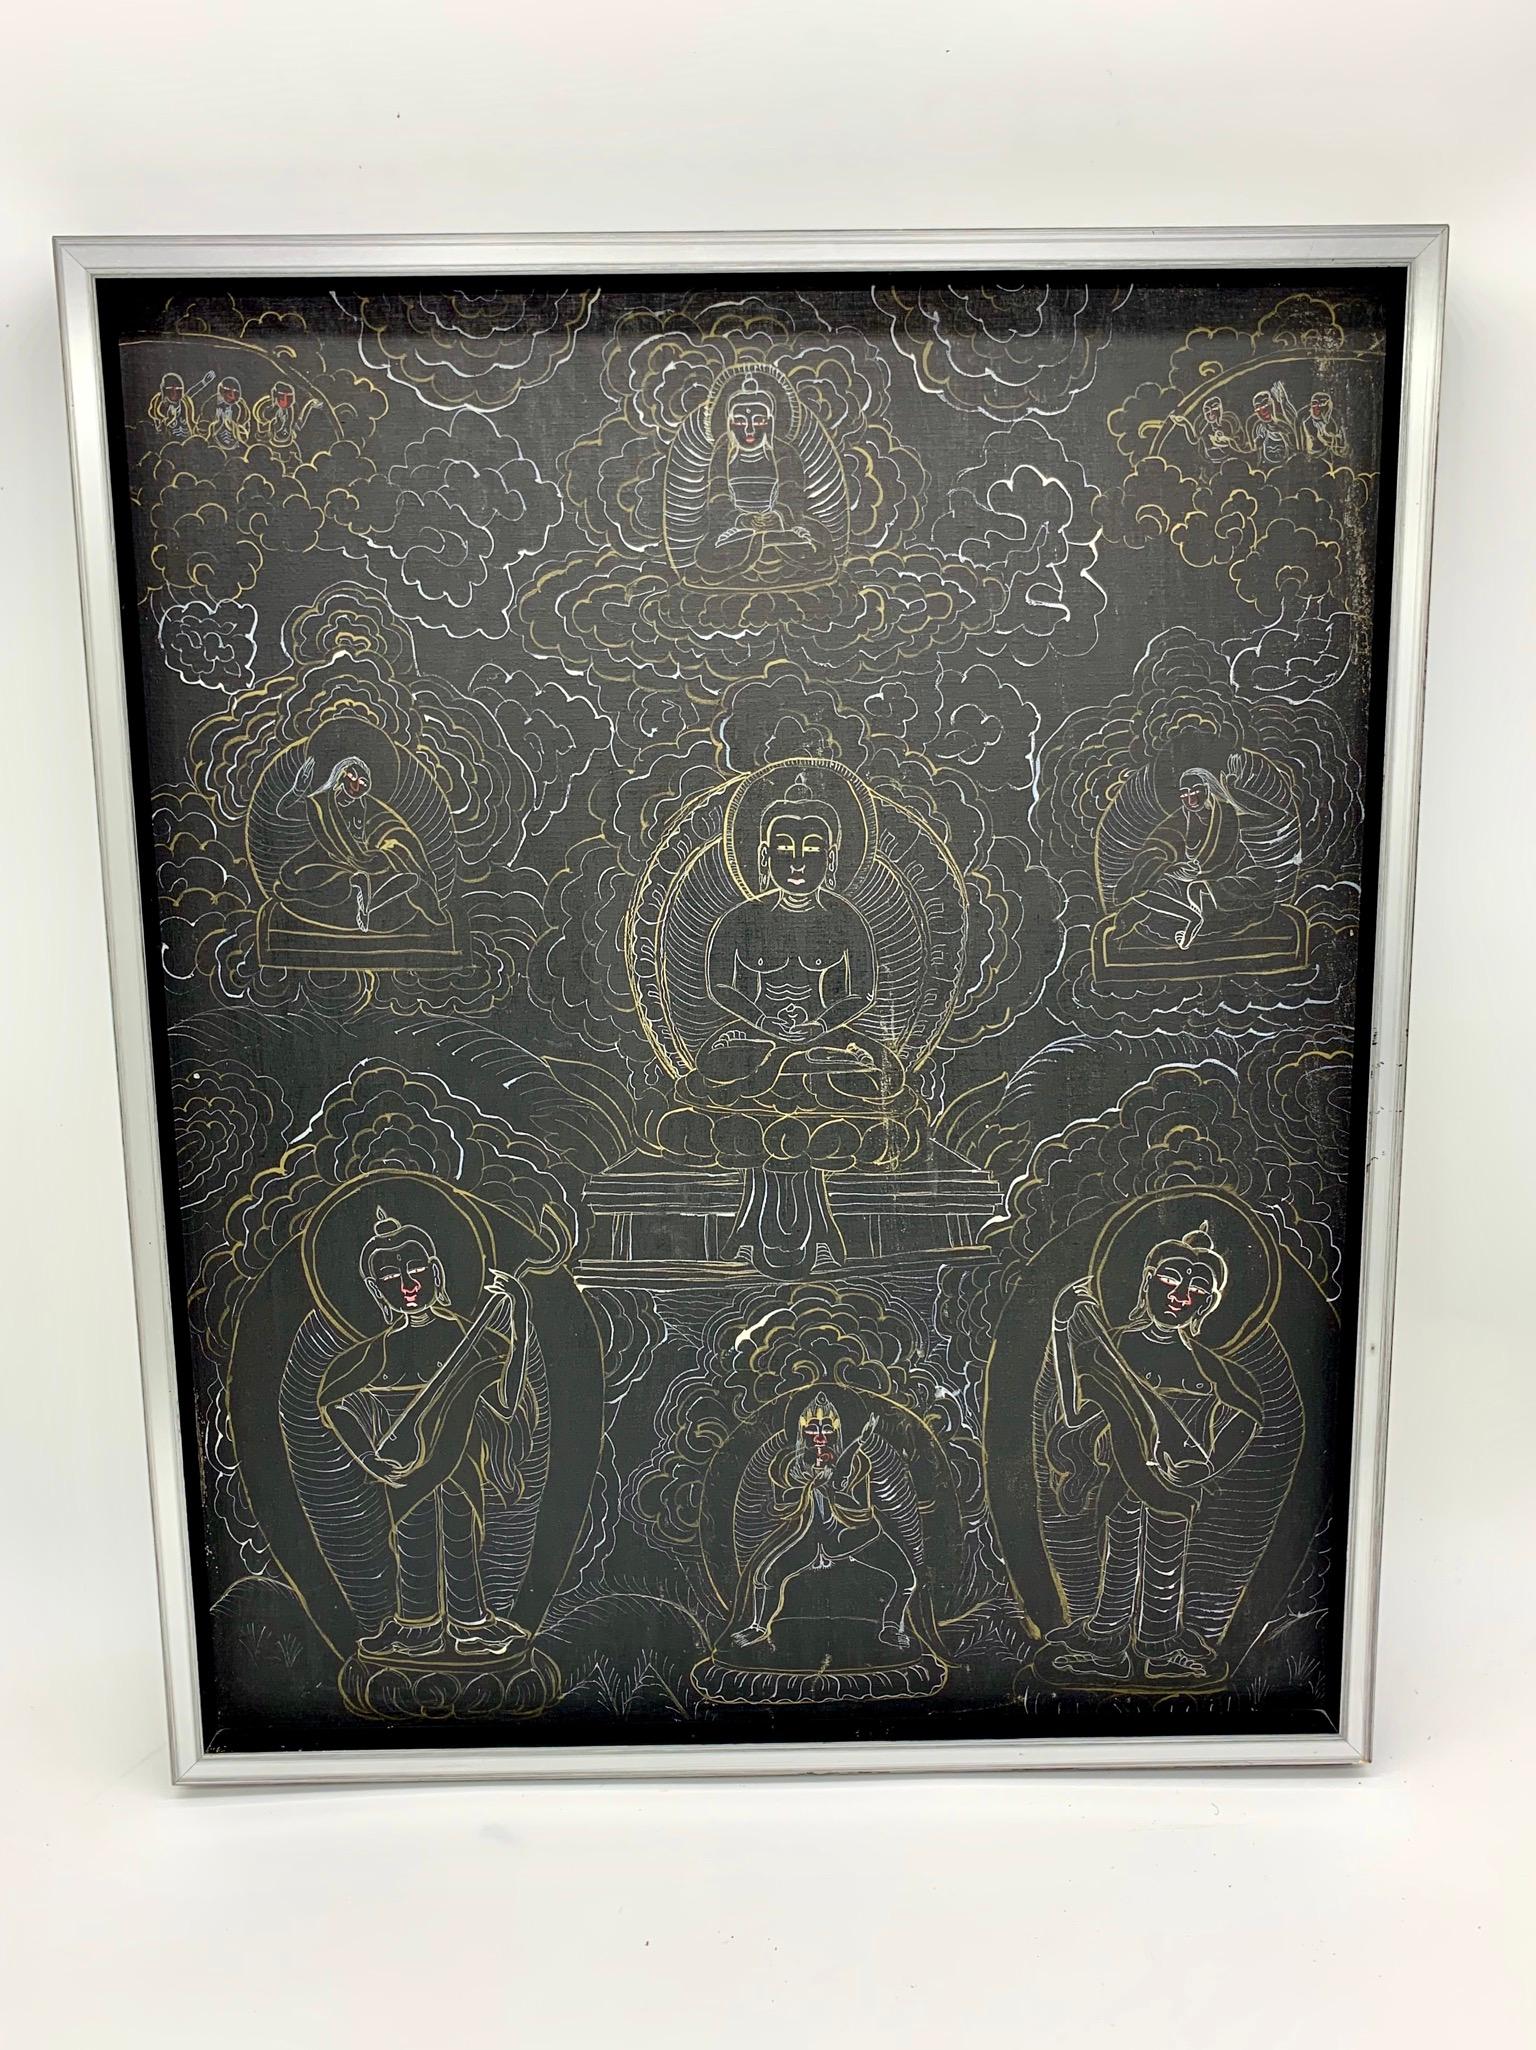 Black and white Chinese mandala with scenes of Buddha,
circa 20th century or earlier.
Framed in silver frame.